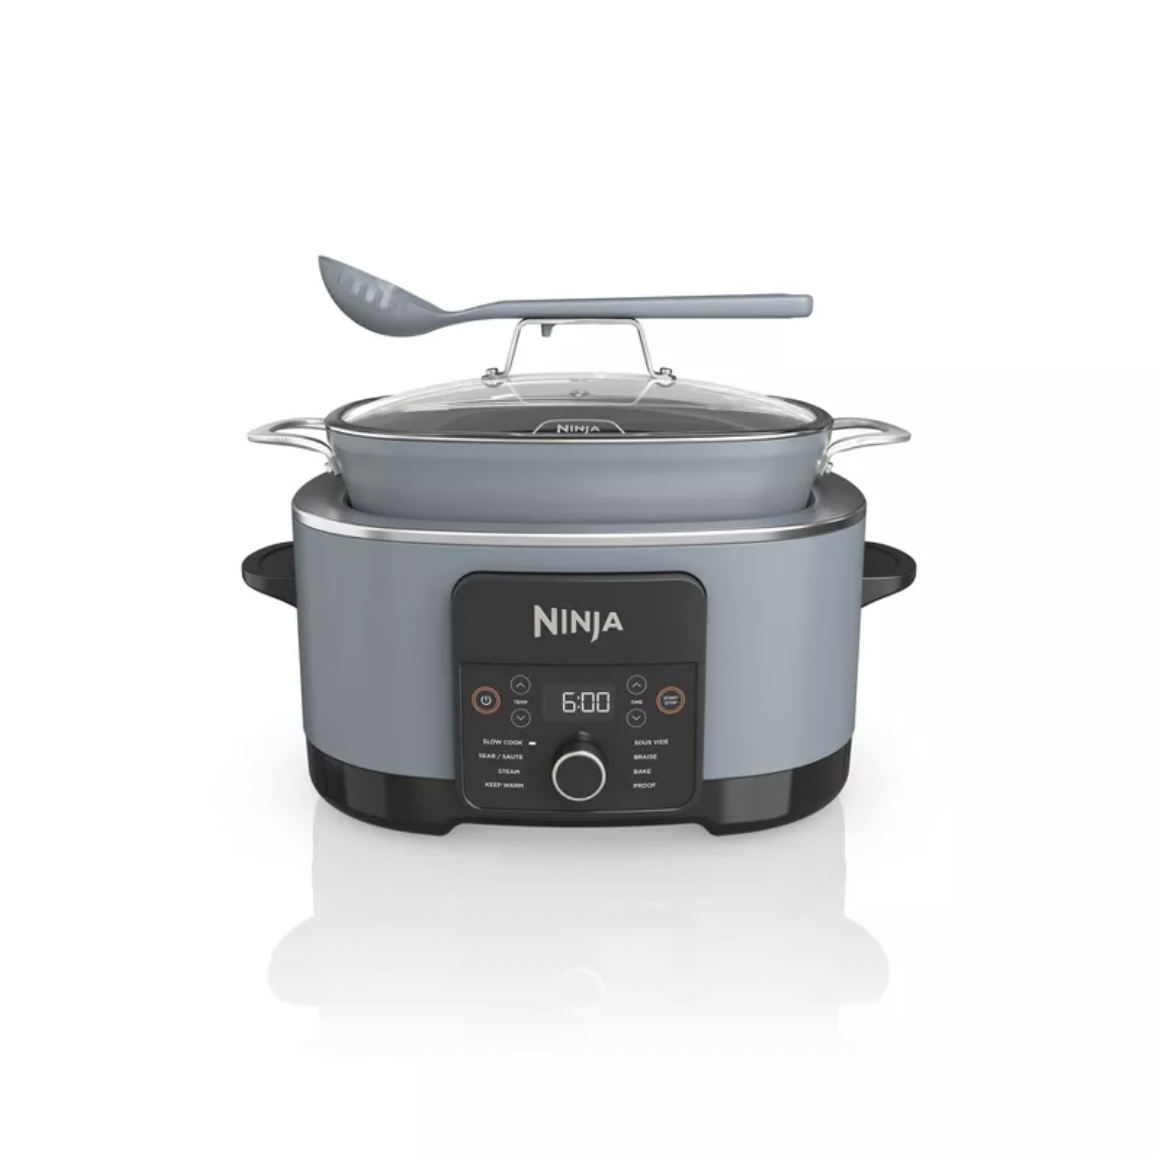 Ninja vs Instant Pot Pressure Cooker – Which One Is Better? 